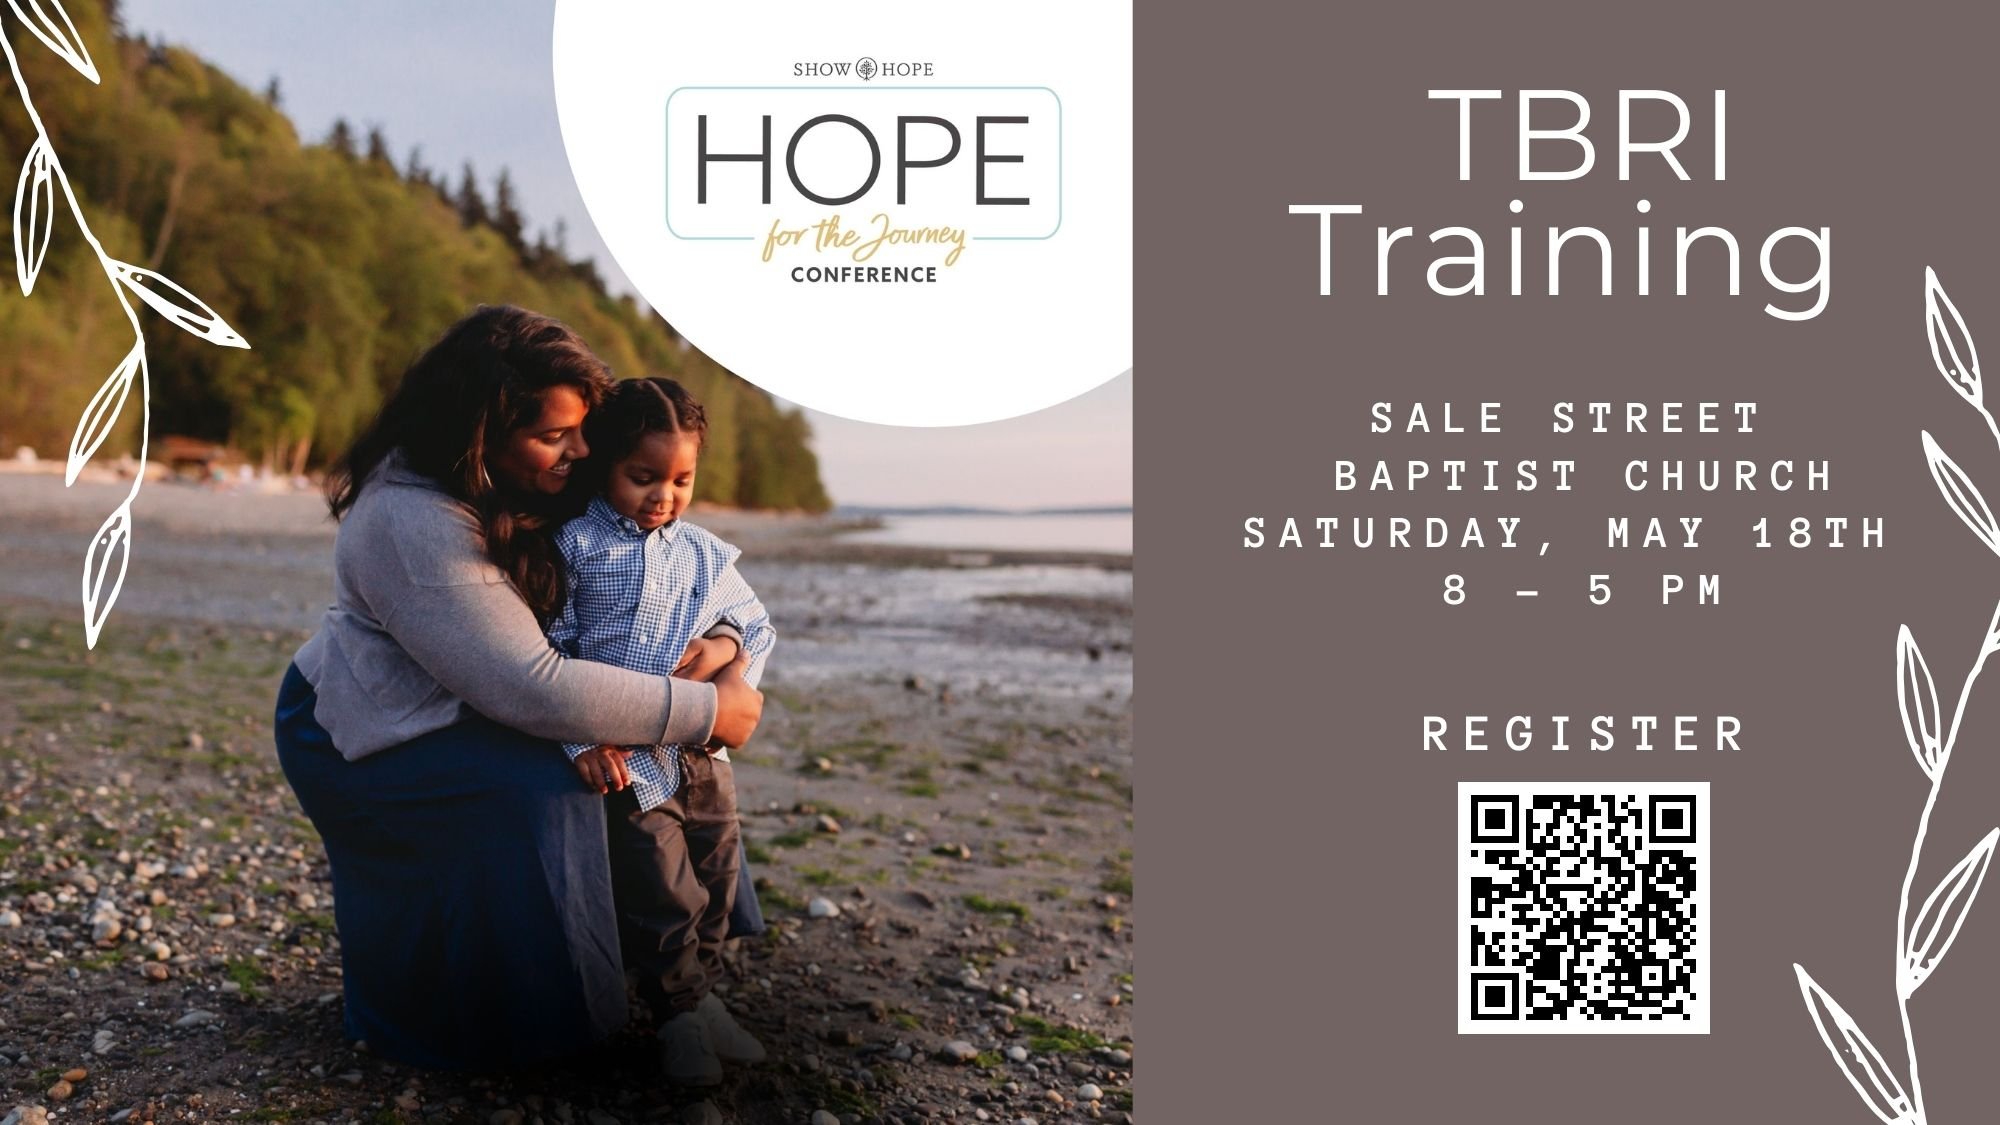 📆 This week at SSBC!

Parents and anyone who works with children are invited to our FREE Hope for the Journey Conference. This is a TBRI (Trust Based Relational Intervention) training Saturday from 8am - 5pm. Sign up here: https://www.salestreet.org